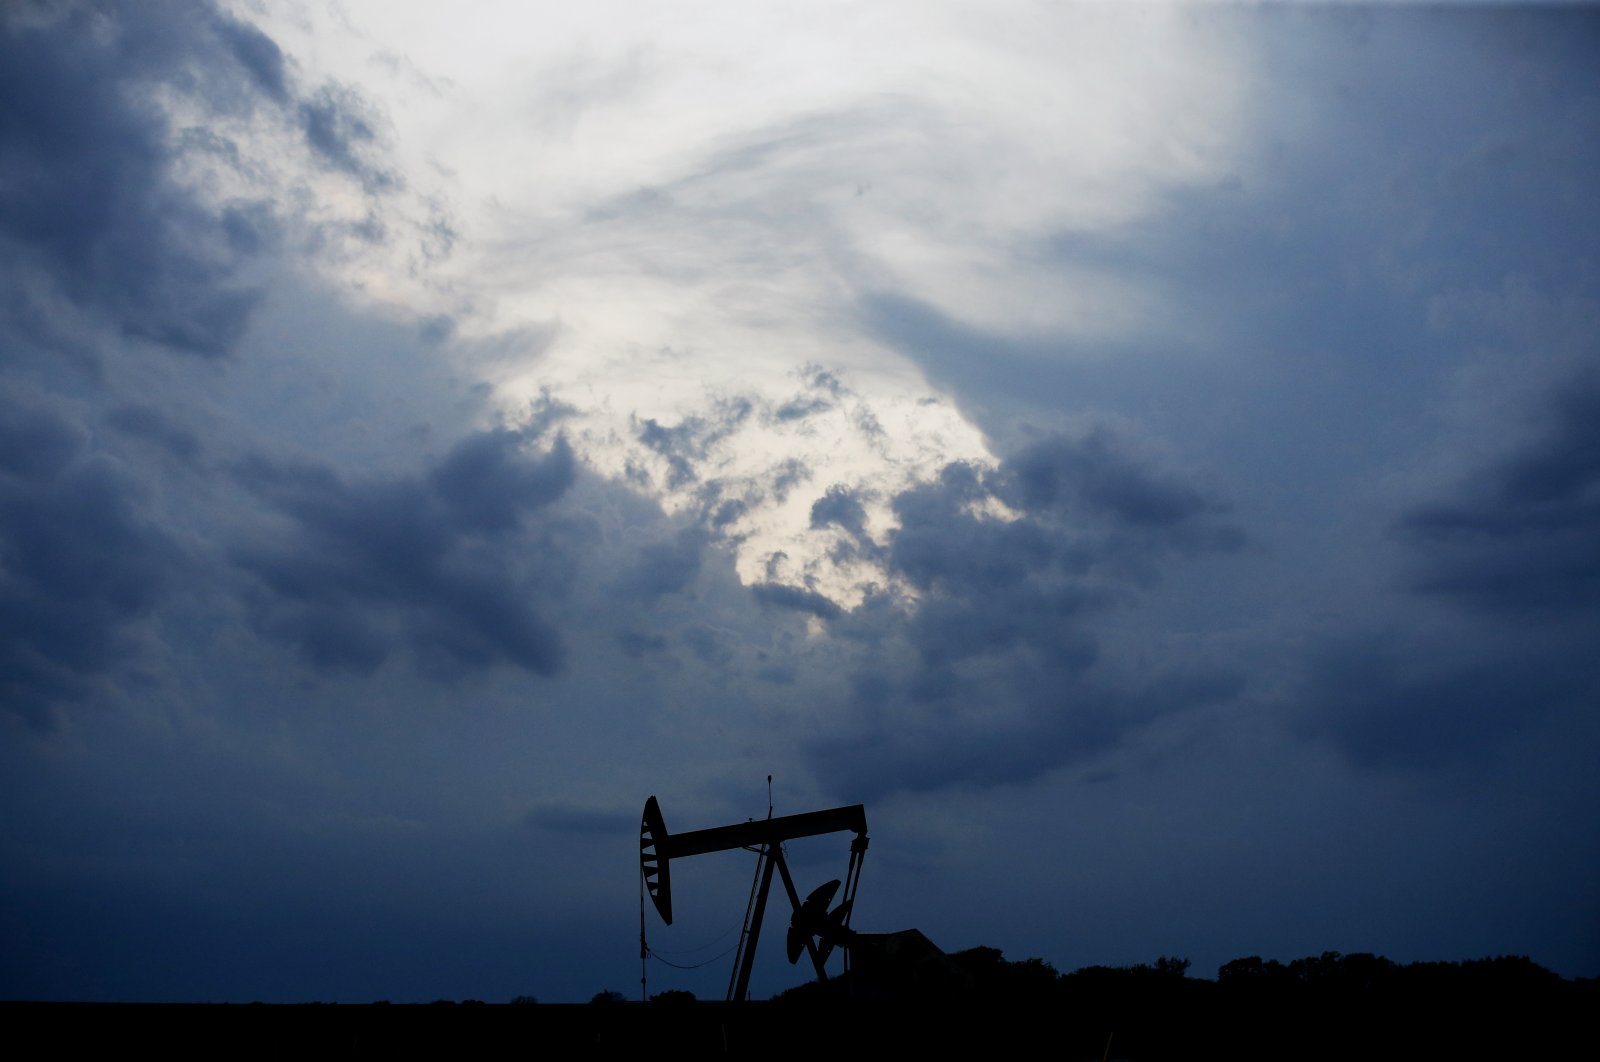 A pumpjack is pictured as a storm moves in Oklahoma City, Oklahoma, U.S., Tuesday, April 21, 2020. (AP Photo)